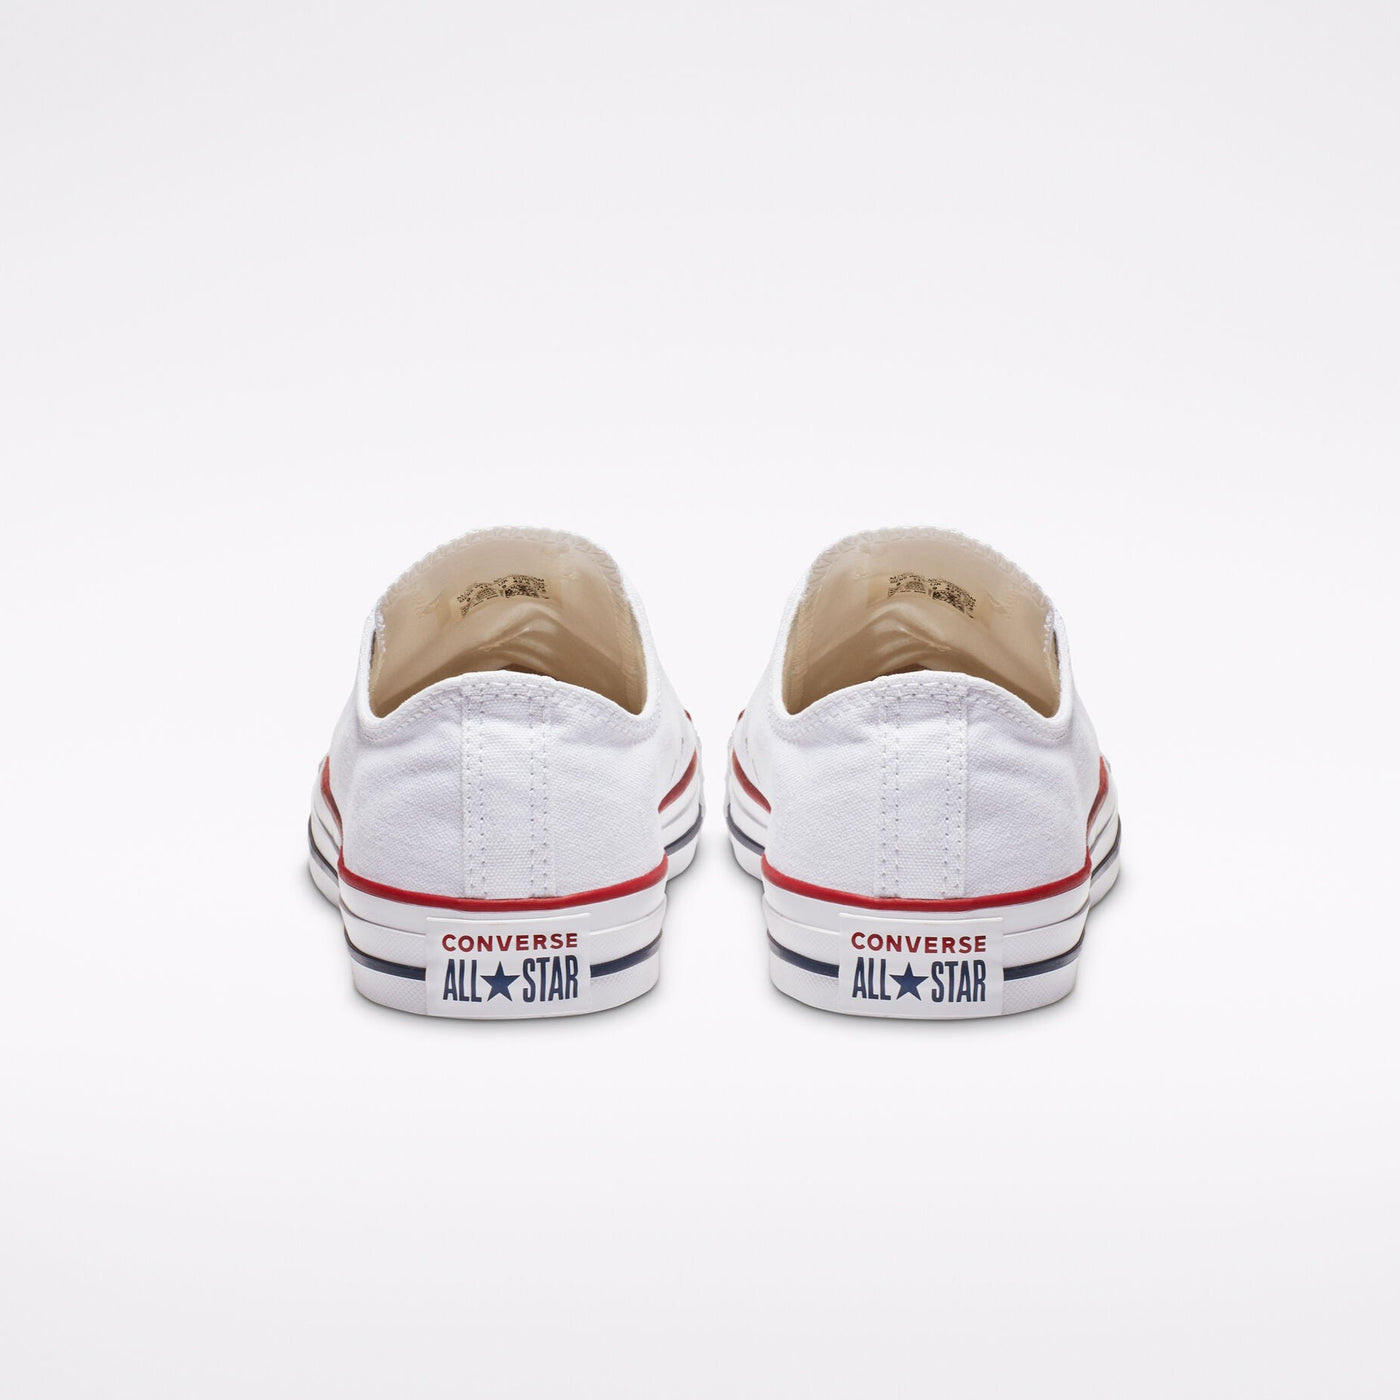 Converse Chuck Taylor All Star Classic Low Top Optical White